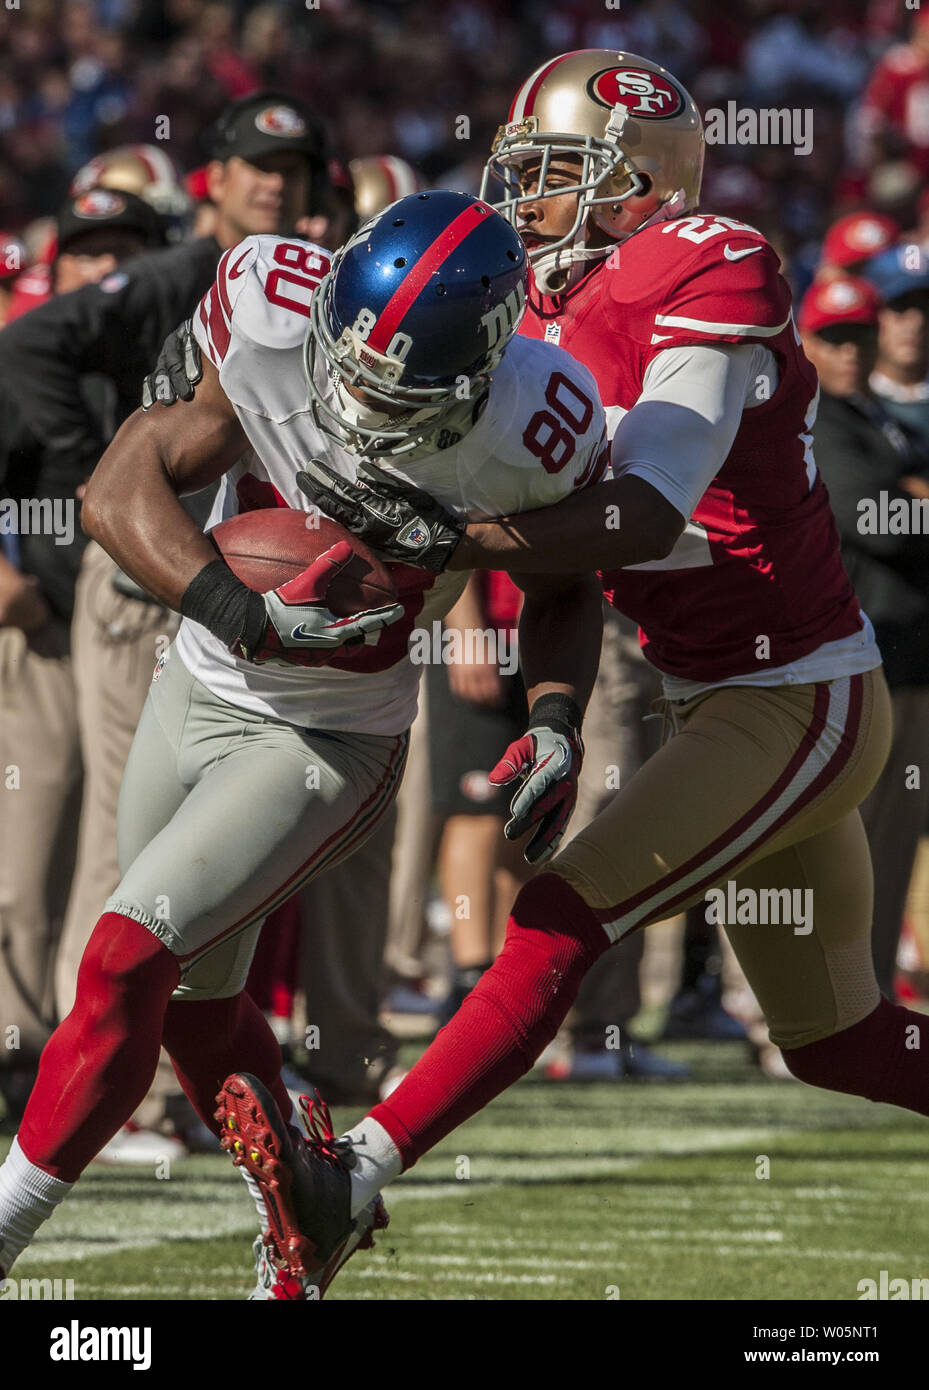 San Francisco 49ers cornerback Carlos Rogers (22) tackles New York Giants wide receiver Victor Cruz (80) in third quarter at Candlestick Park in San Francisco on October 14, 2012.  The Giants defeated the 49ers 26-3.    UPI/Al Golub. Stock Photo